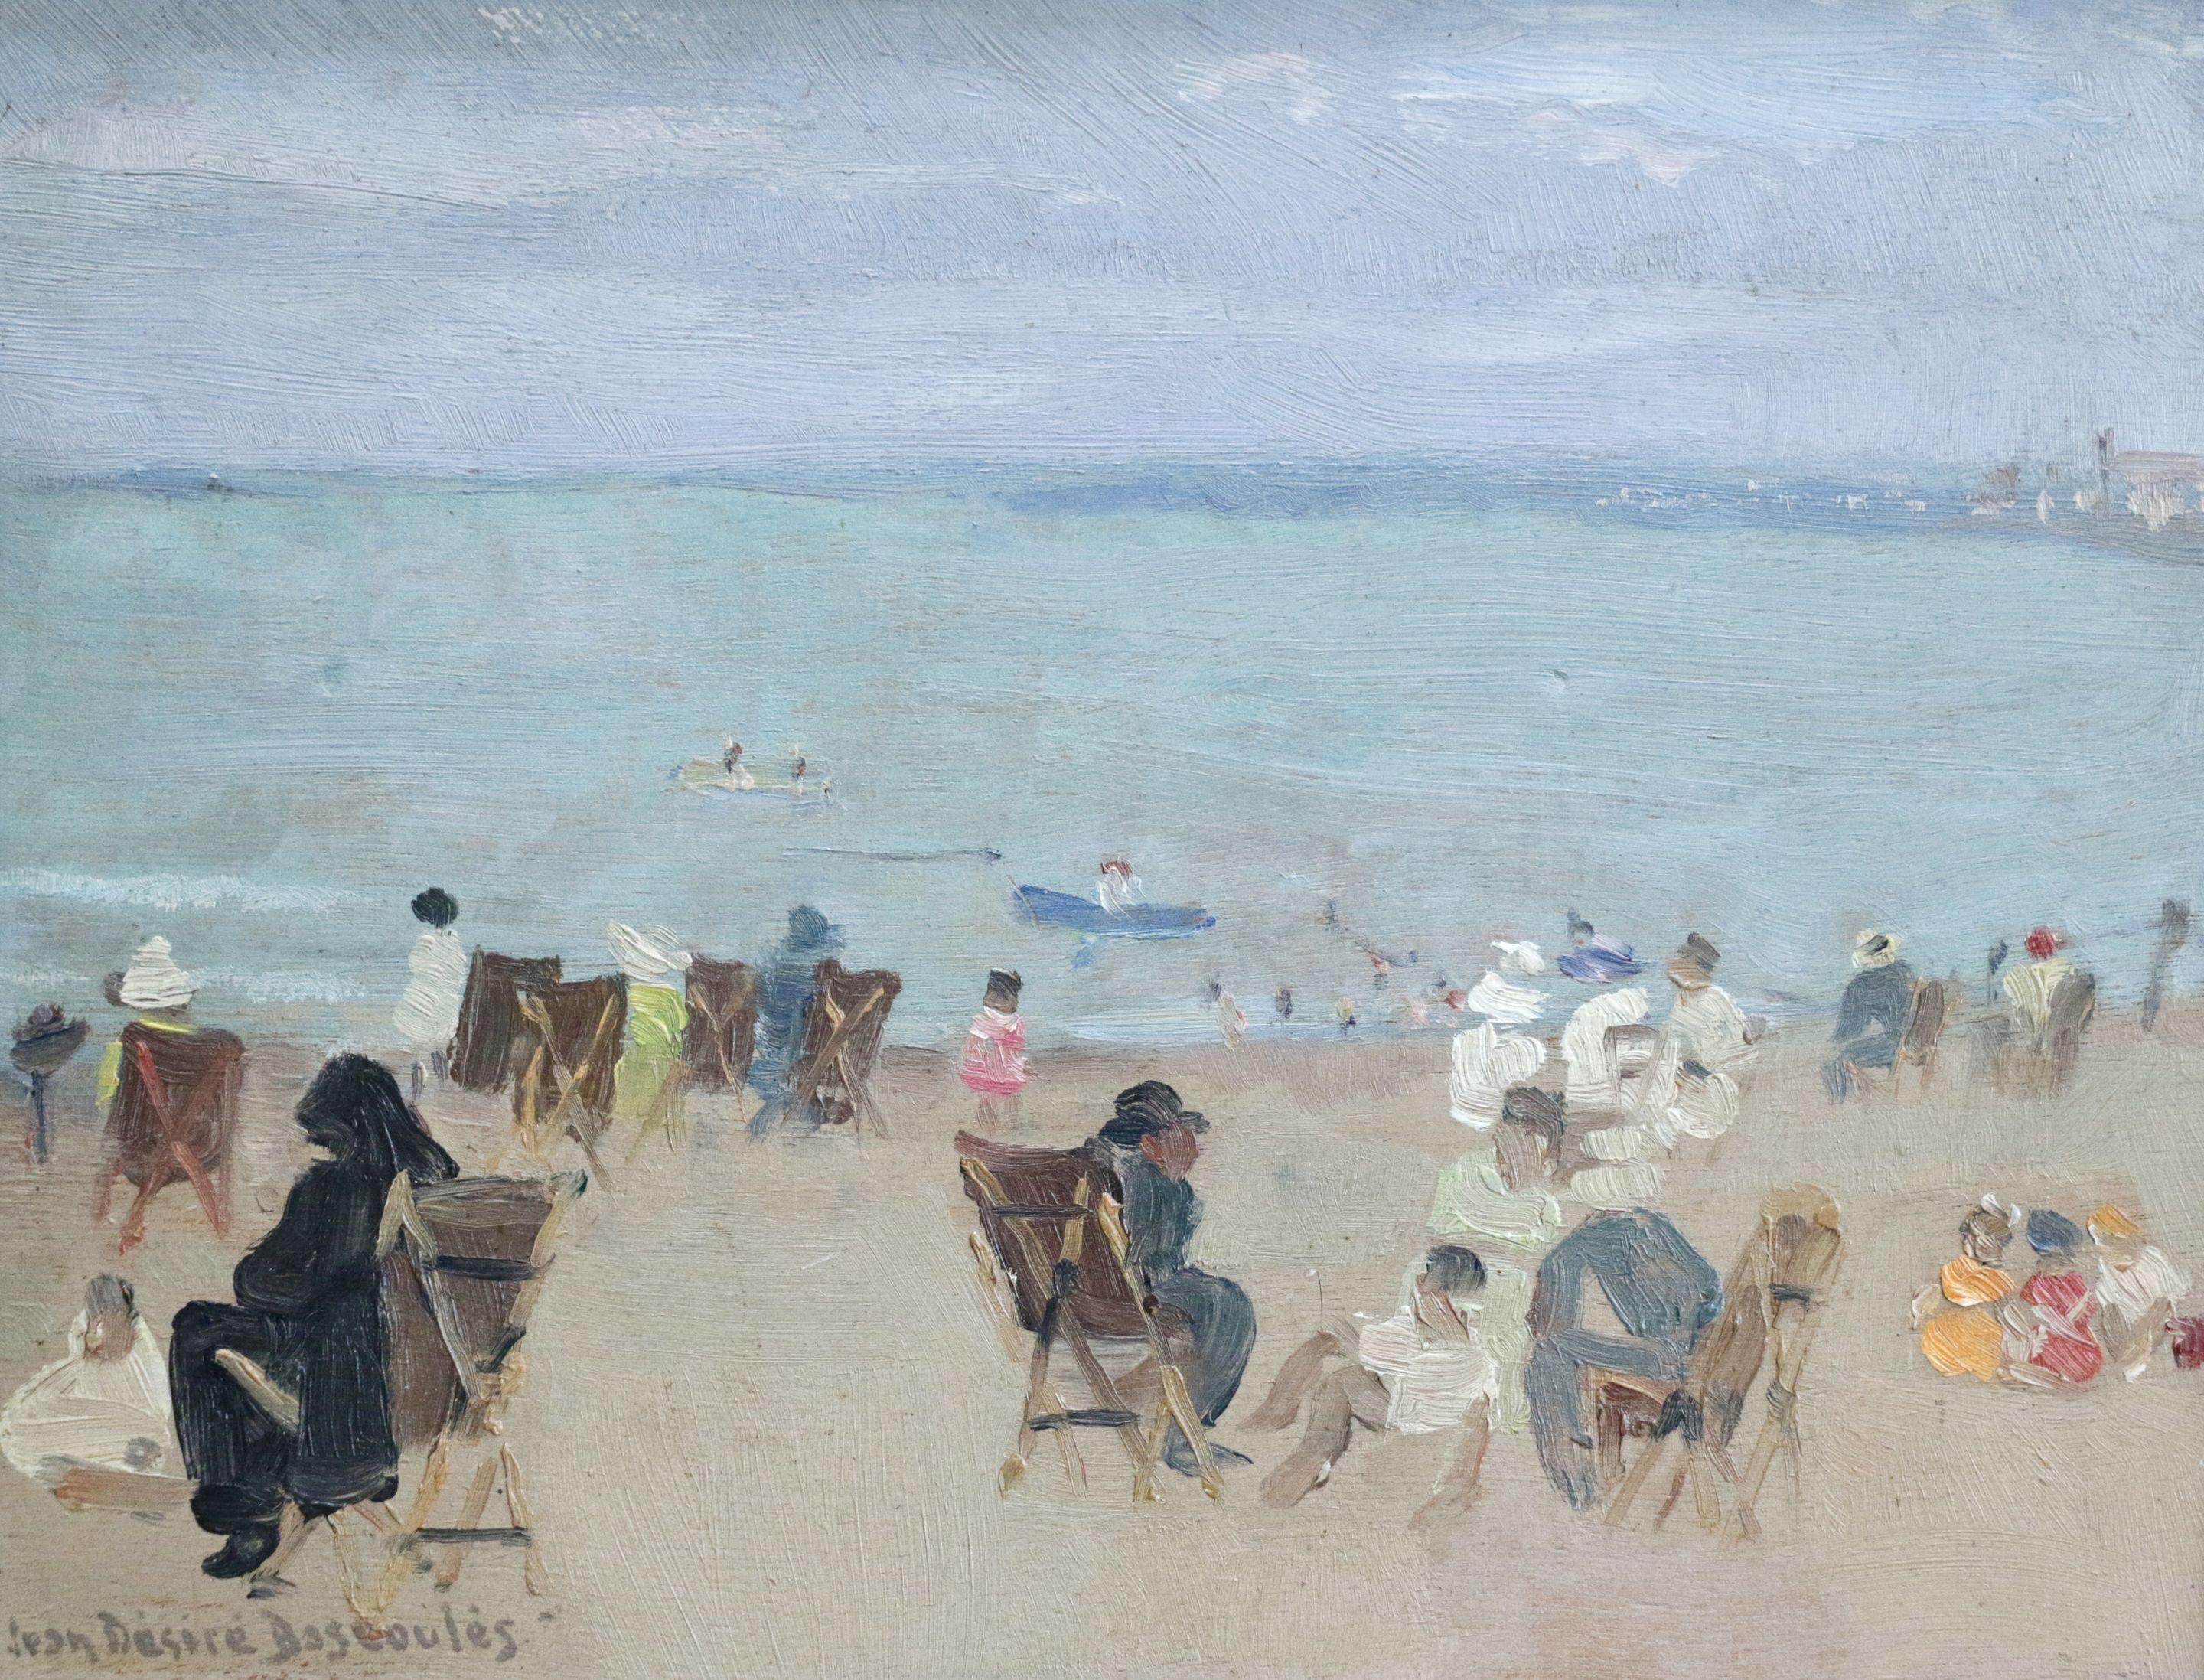 Jean Desire Bascoules Figurative Painting - Plage Alger - Soir - Mid 20th Century Oil, Figures on Beach by Jean Bascoulles